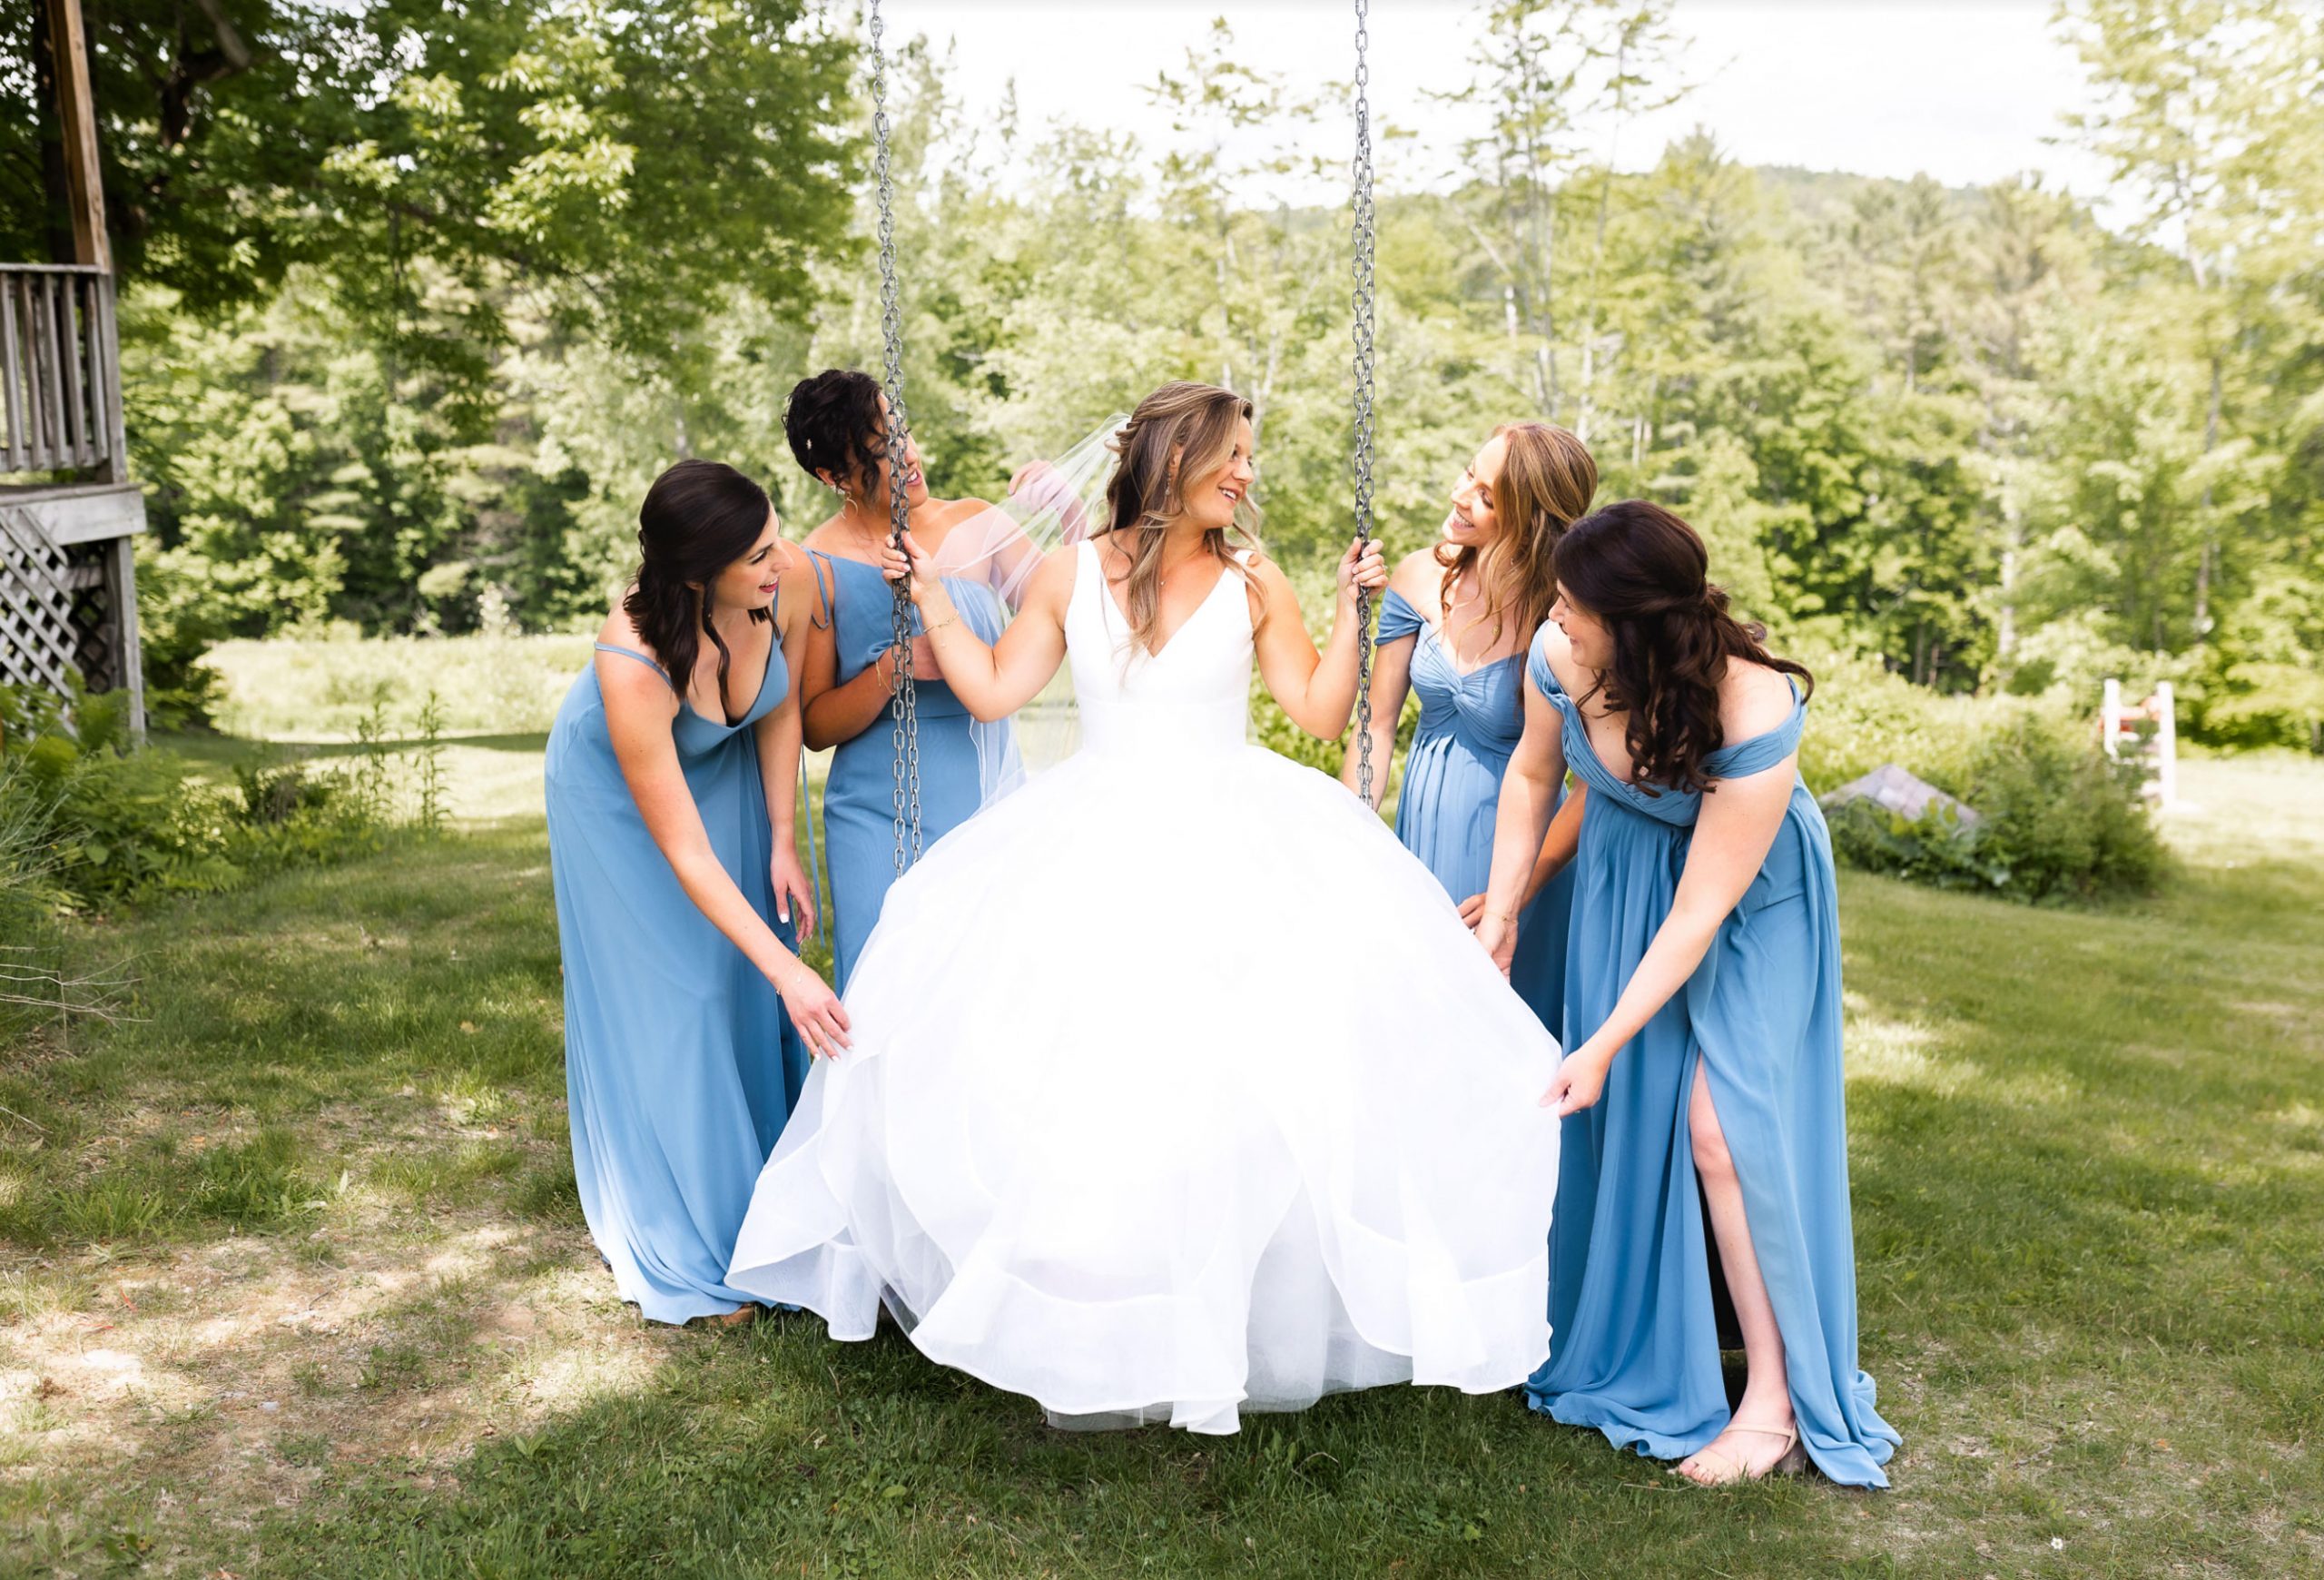 Bride on a swing surrounded by bridesmaids in blue dresses at a Vermont wedding.